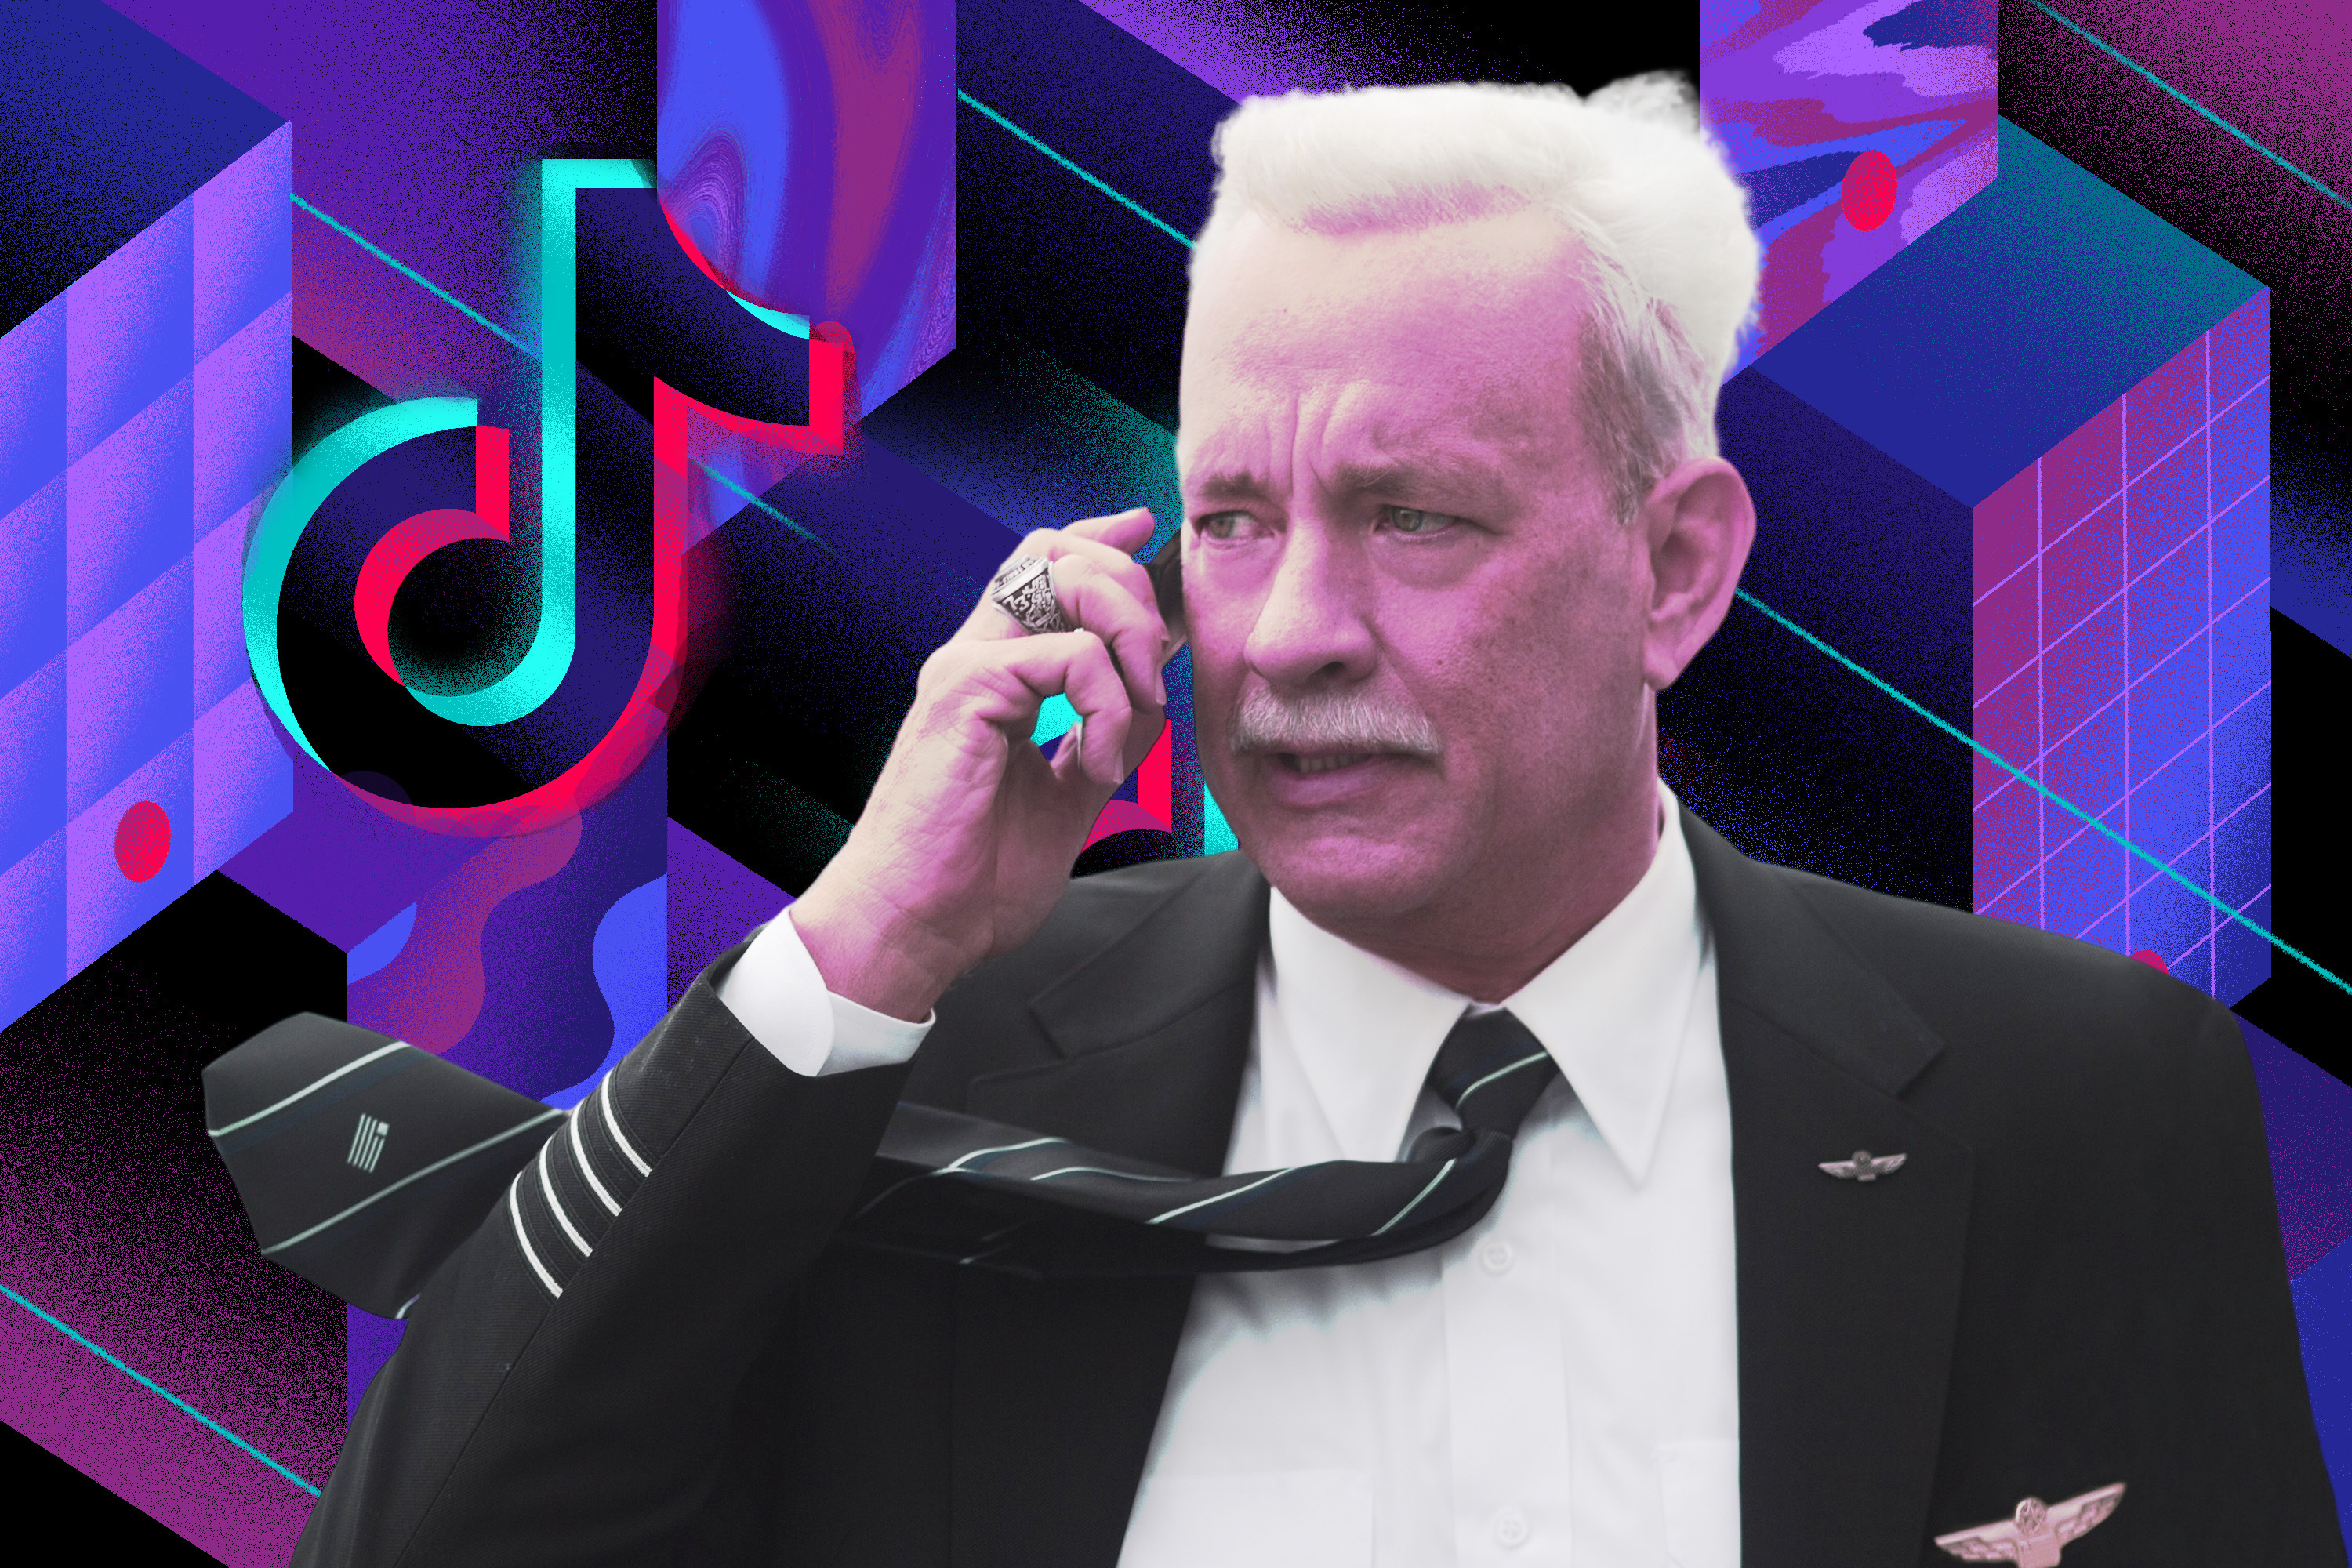 Tom Hanks in Sully, talking into his phone with his tie askew, set against an illustration including TikTok’s logo.